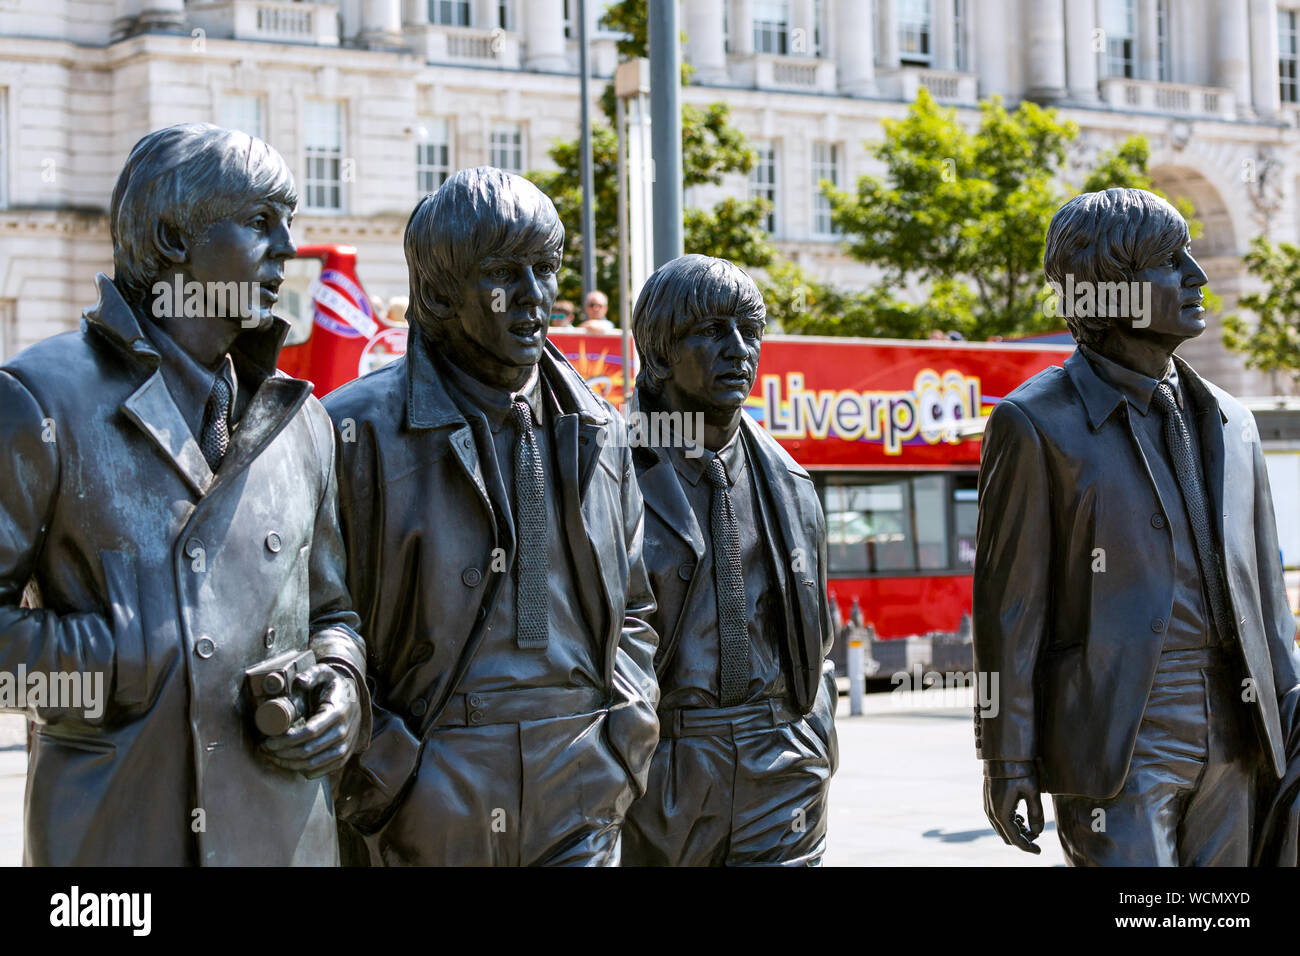 The Beatles Statue at Pier Head in Liverpool. River Mersey England UK Stock Photo